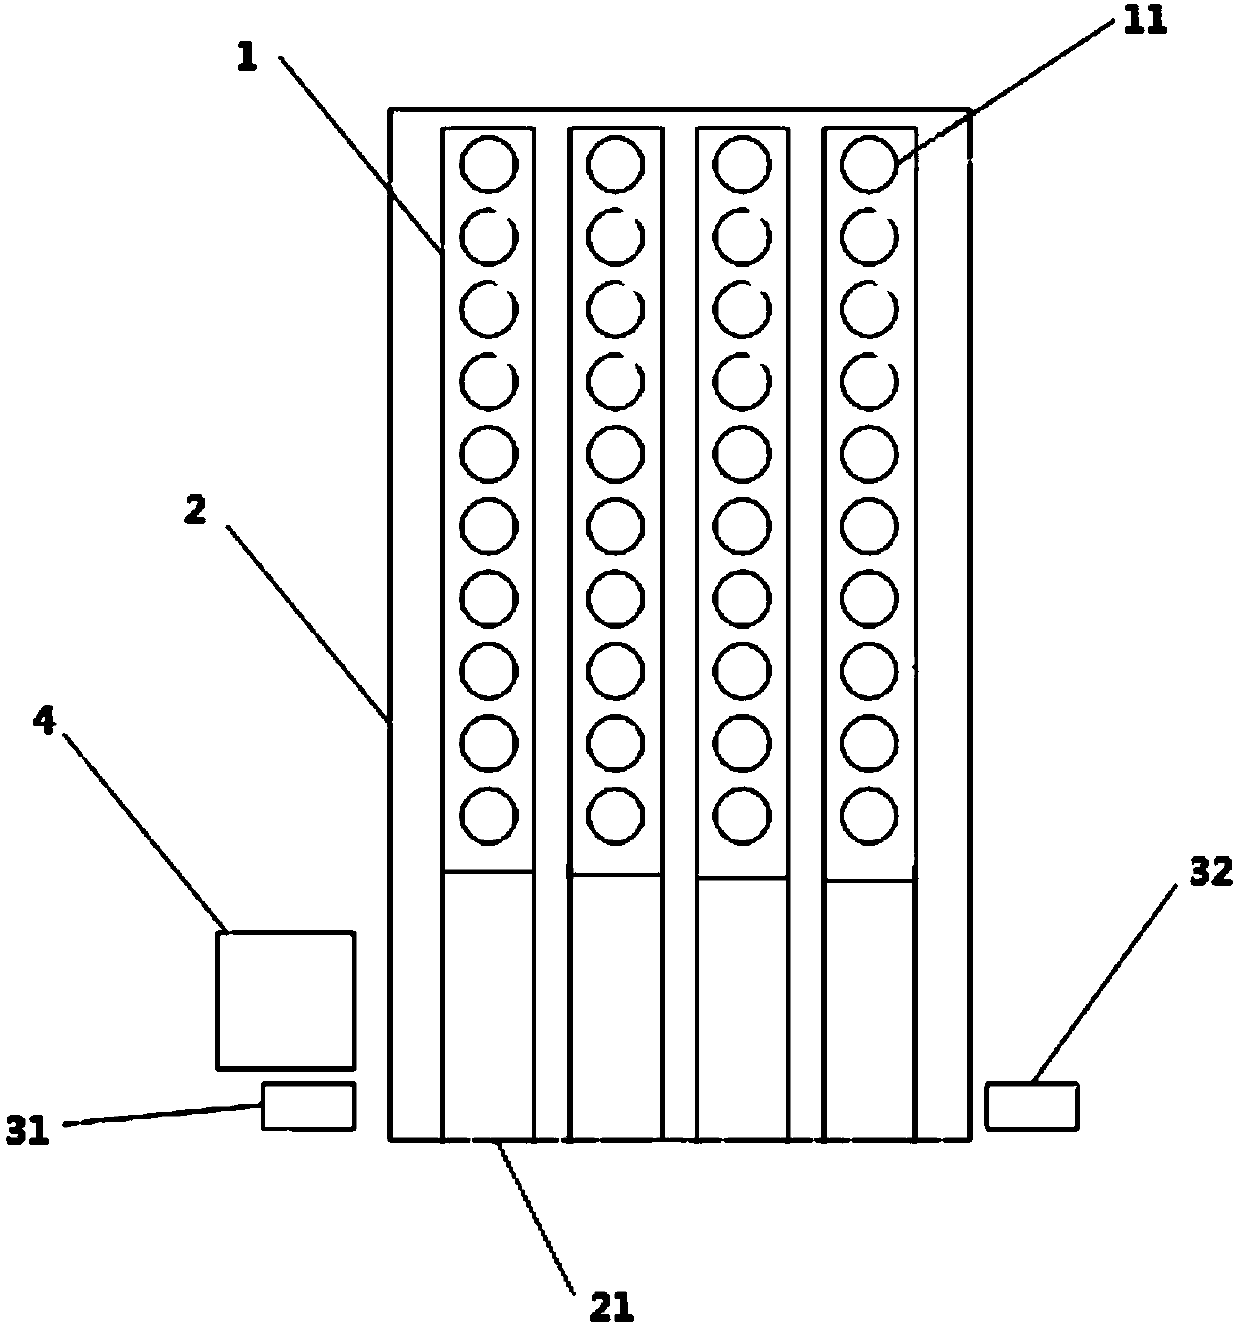 Recognition device for test tube